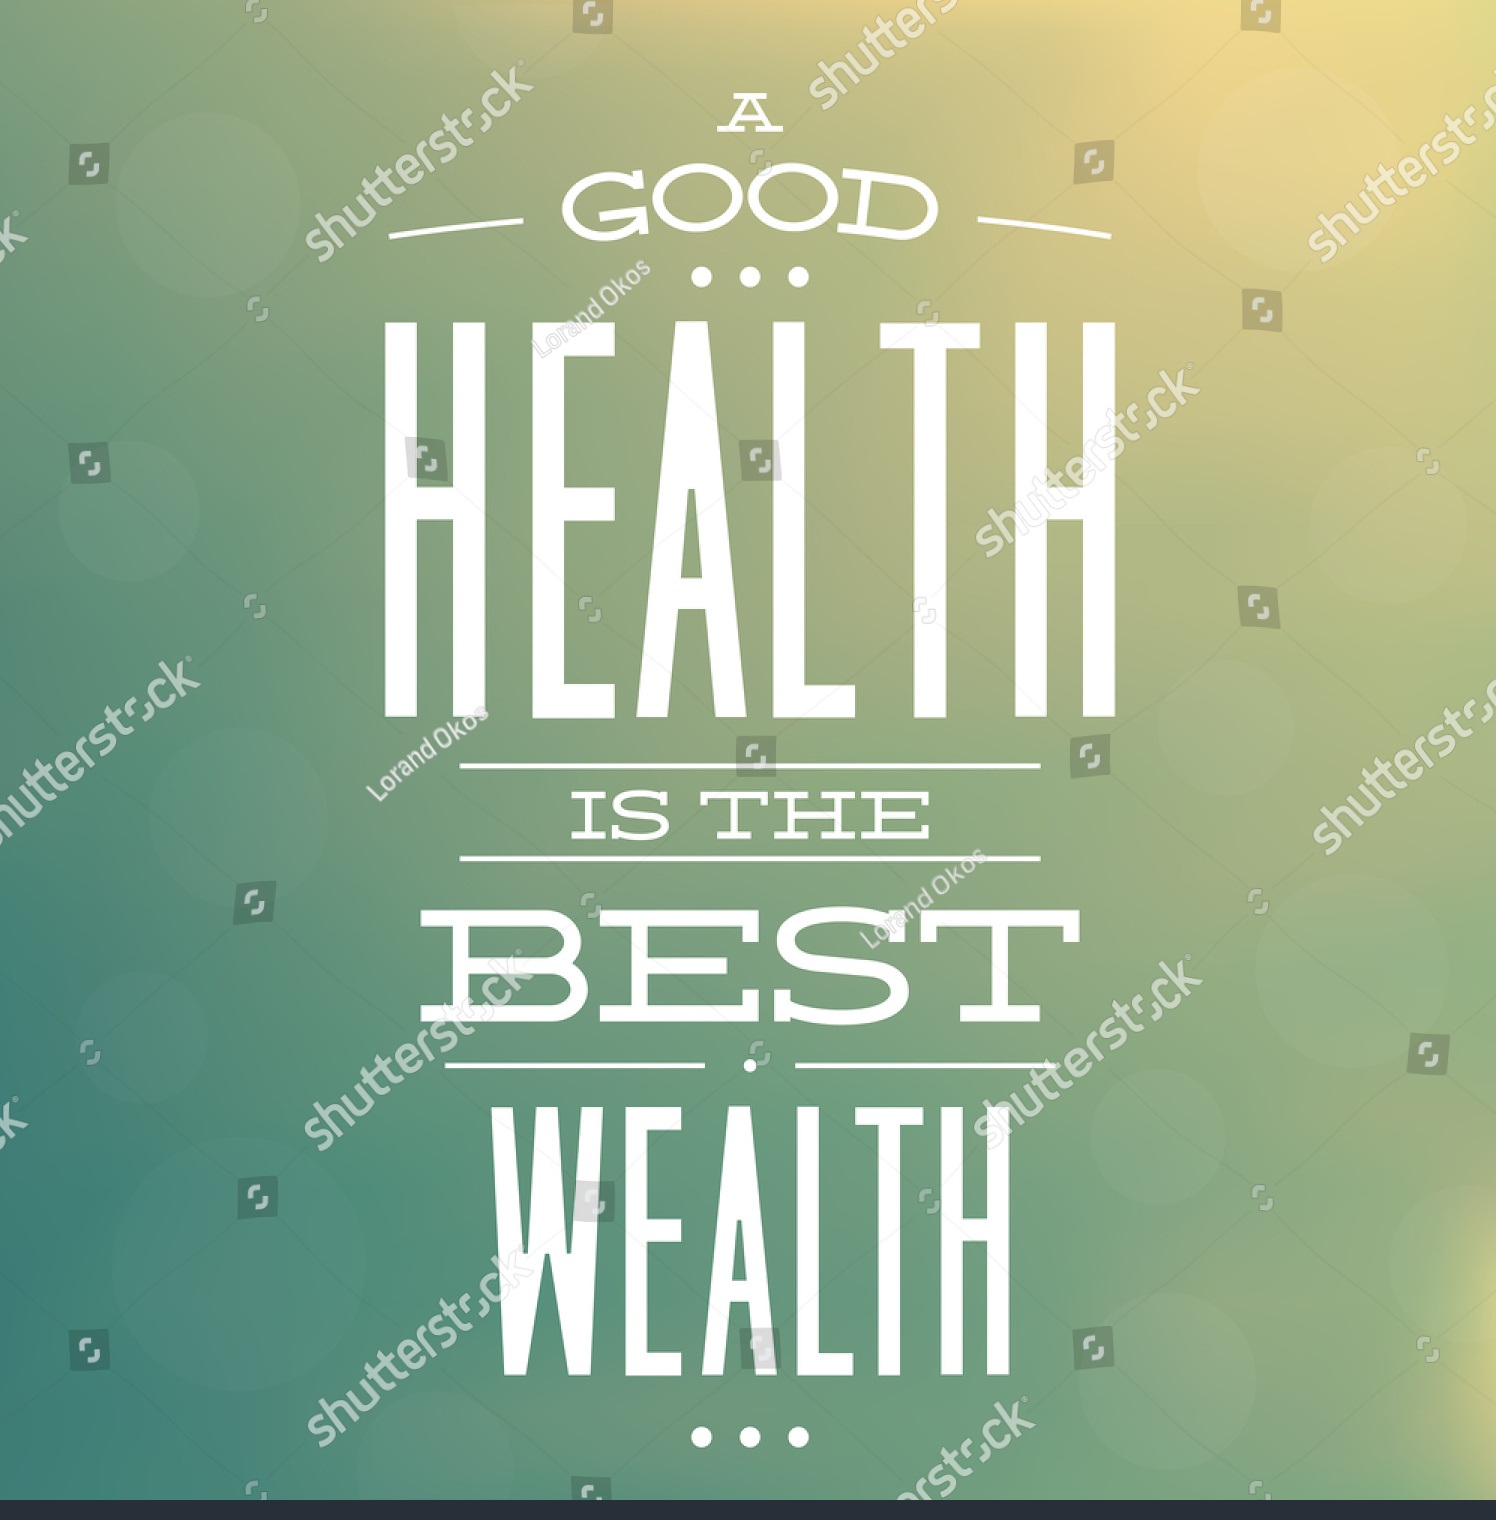 Good Health is the Best Health